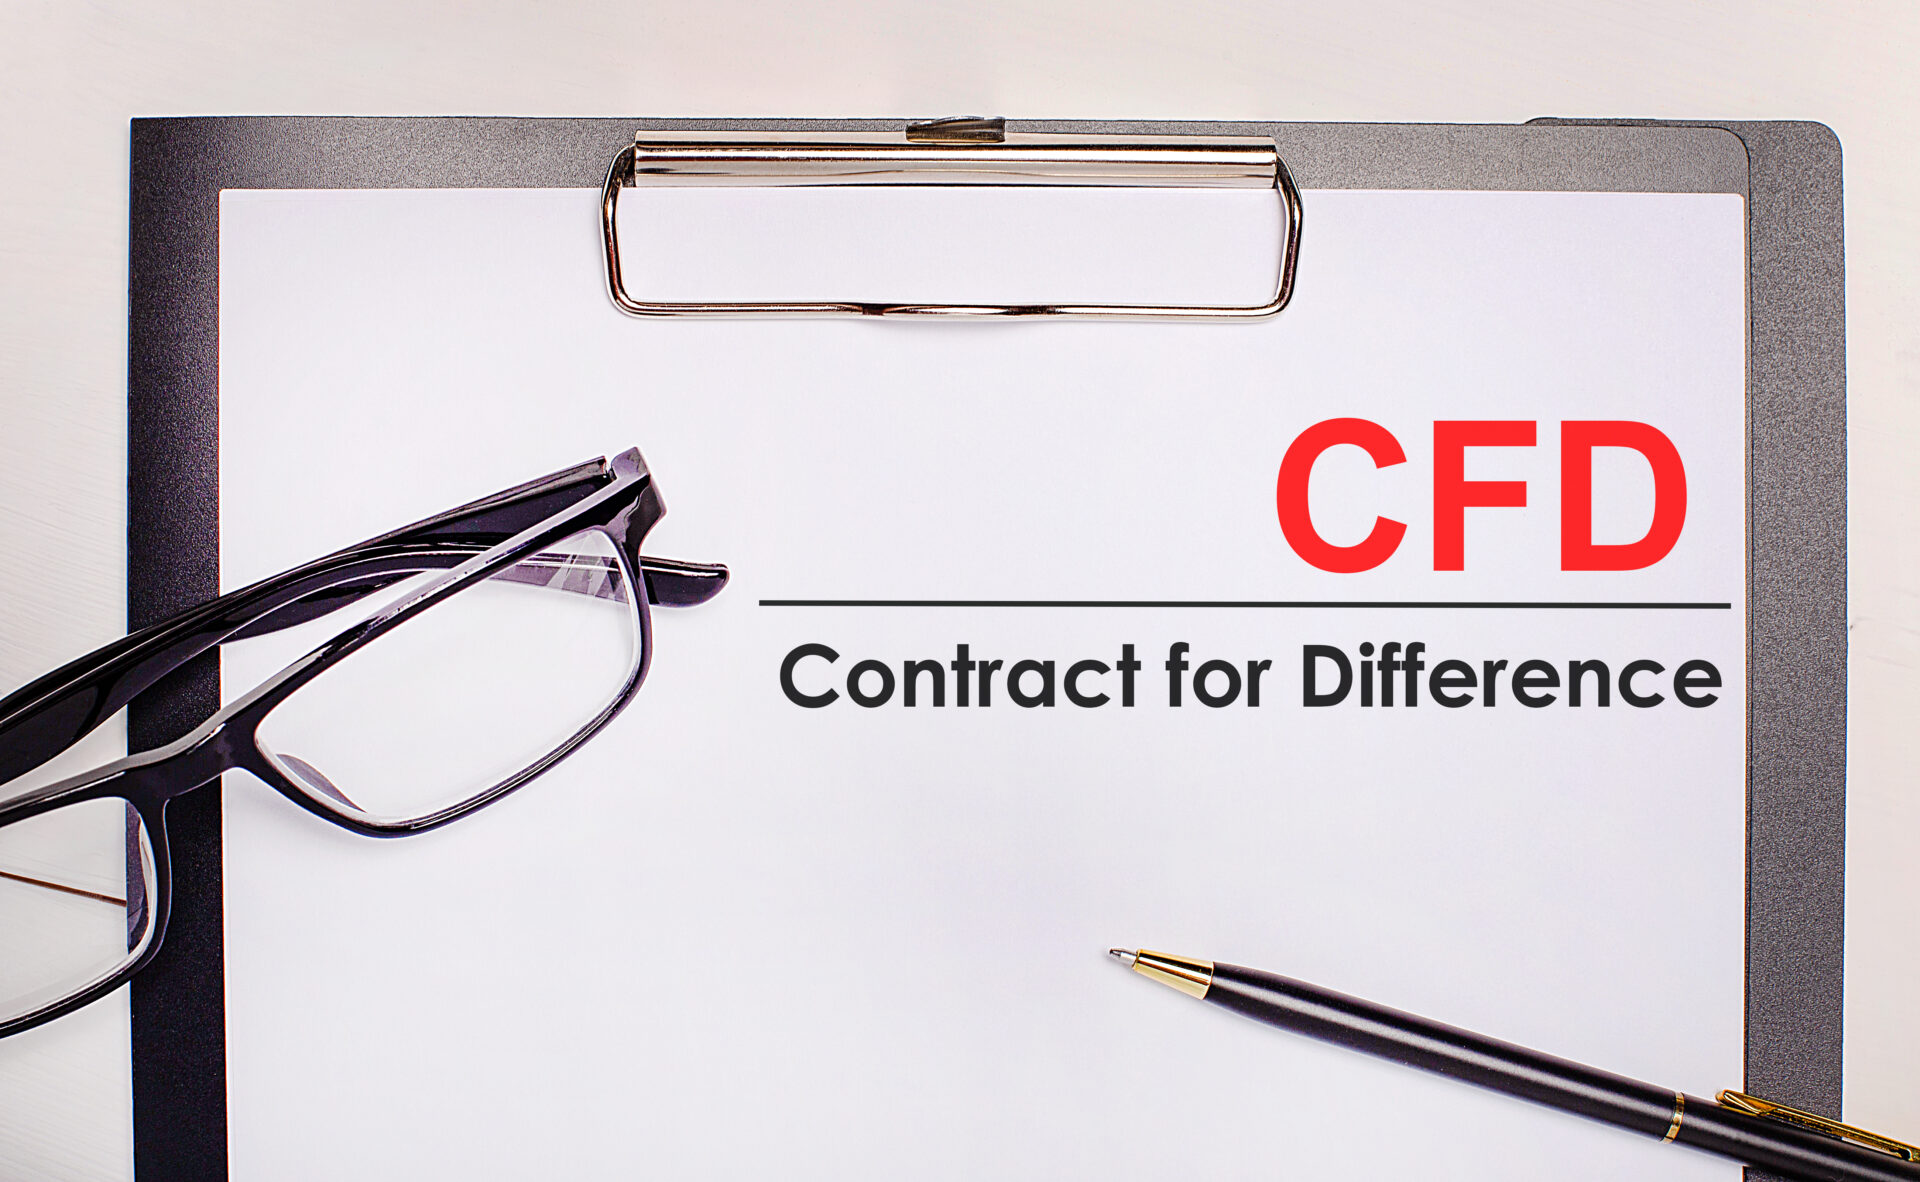 Czym jest CFD (Contract for Difference)?